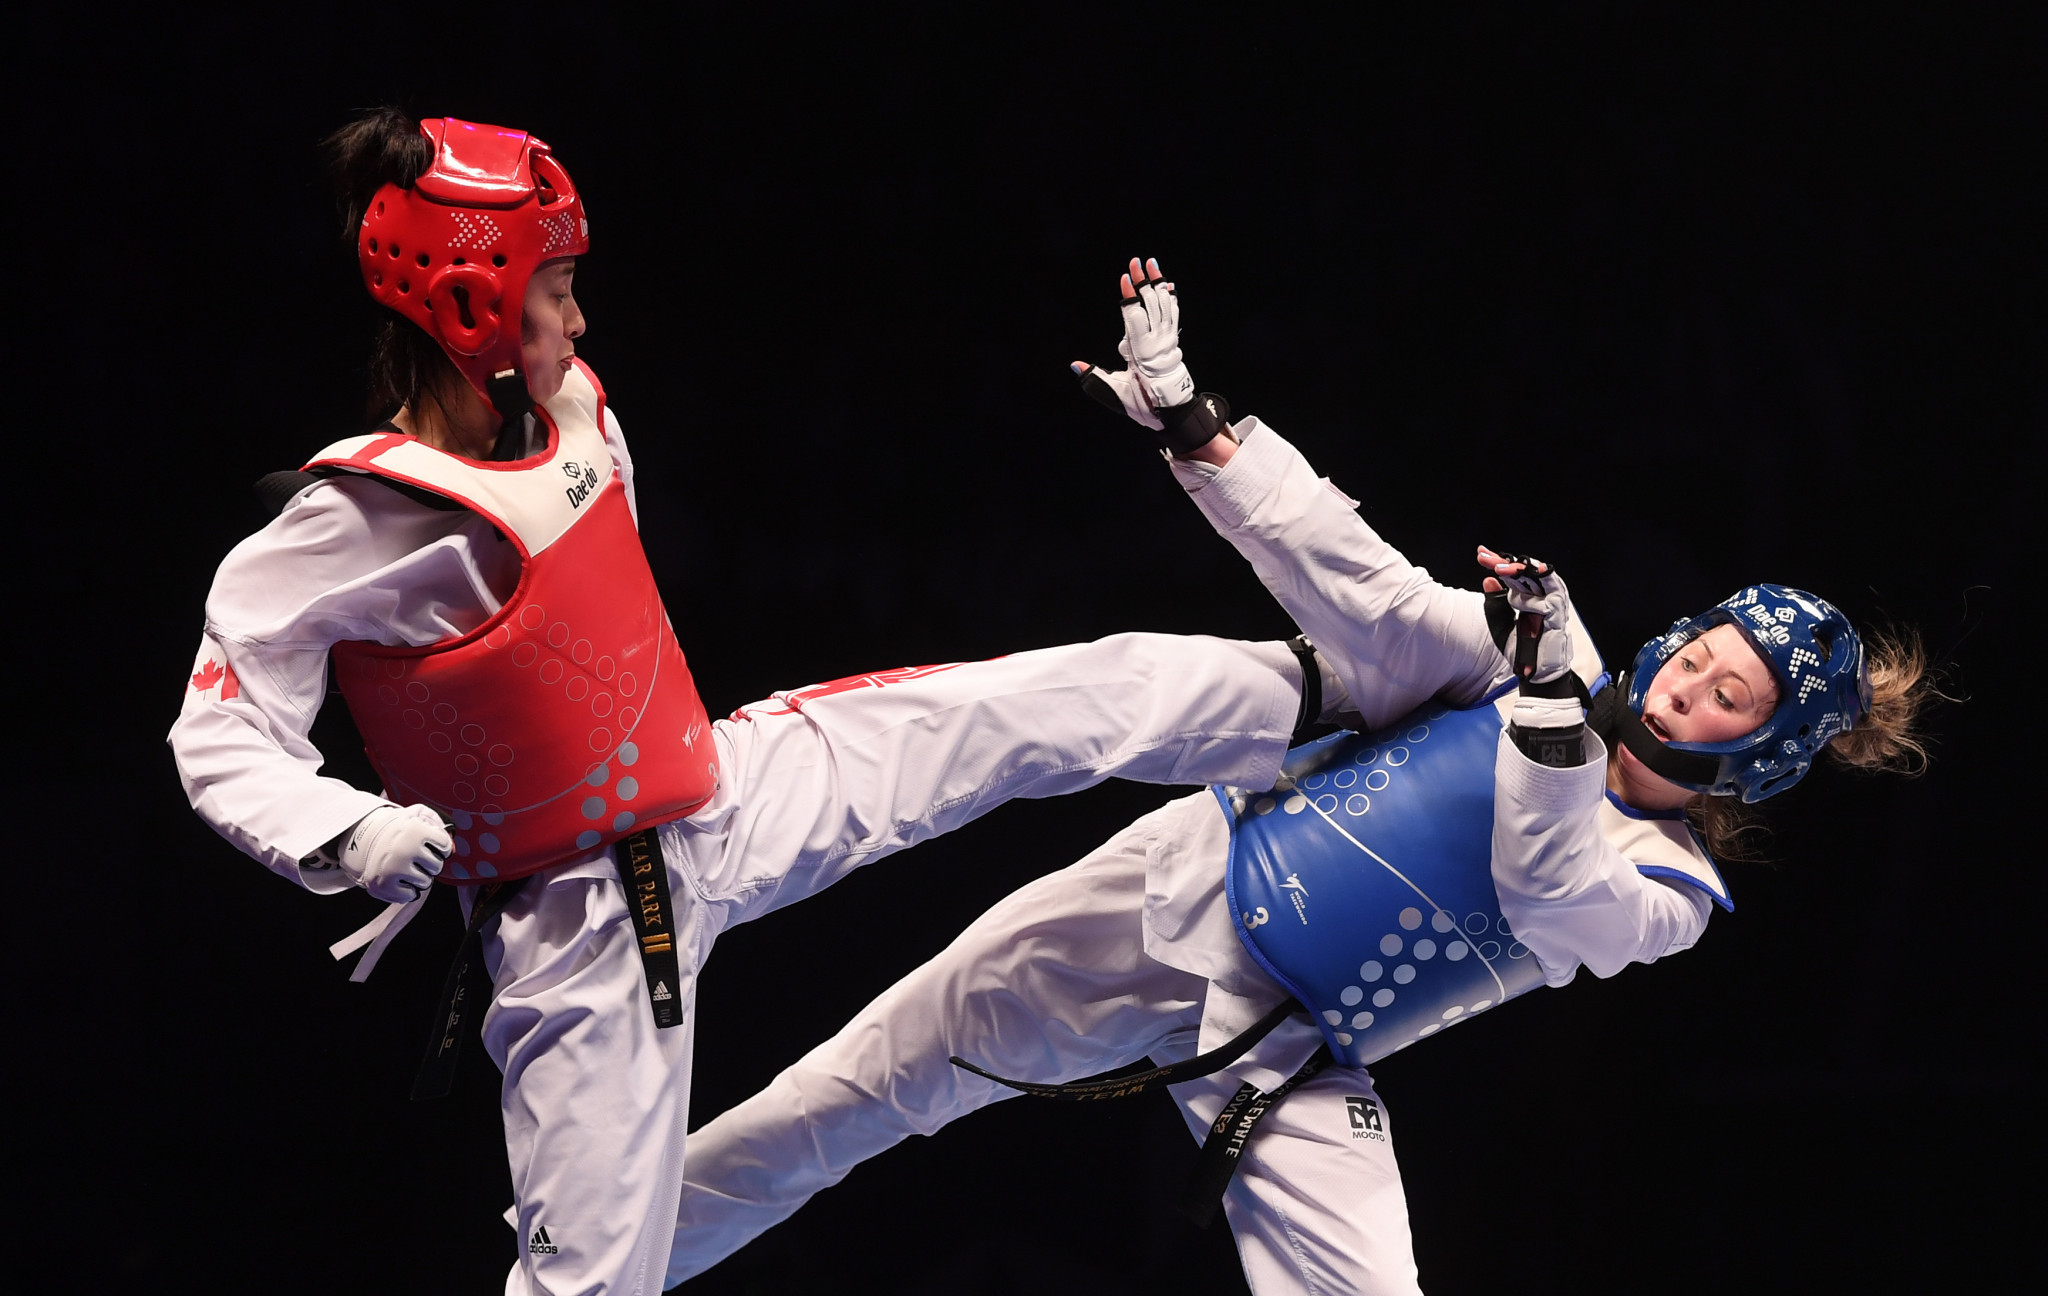 The new-look Board of Directors is responsible for guiding Taekwondo Canada into the future ©Getty Images